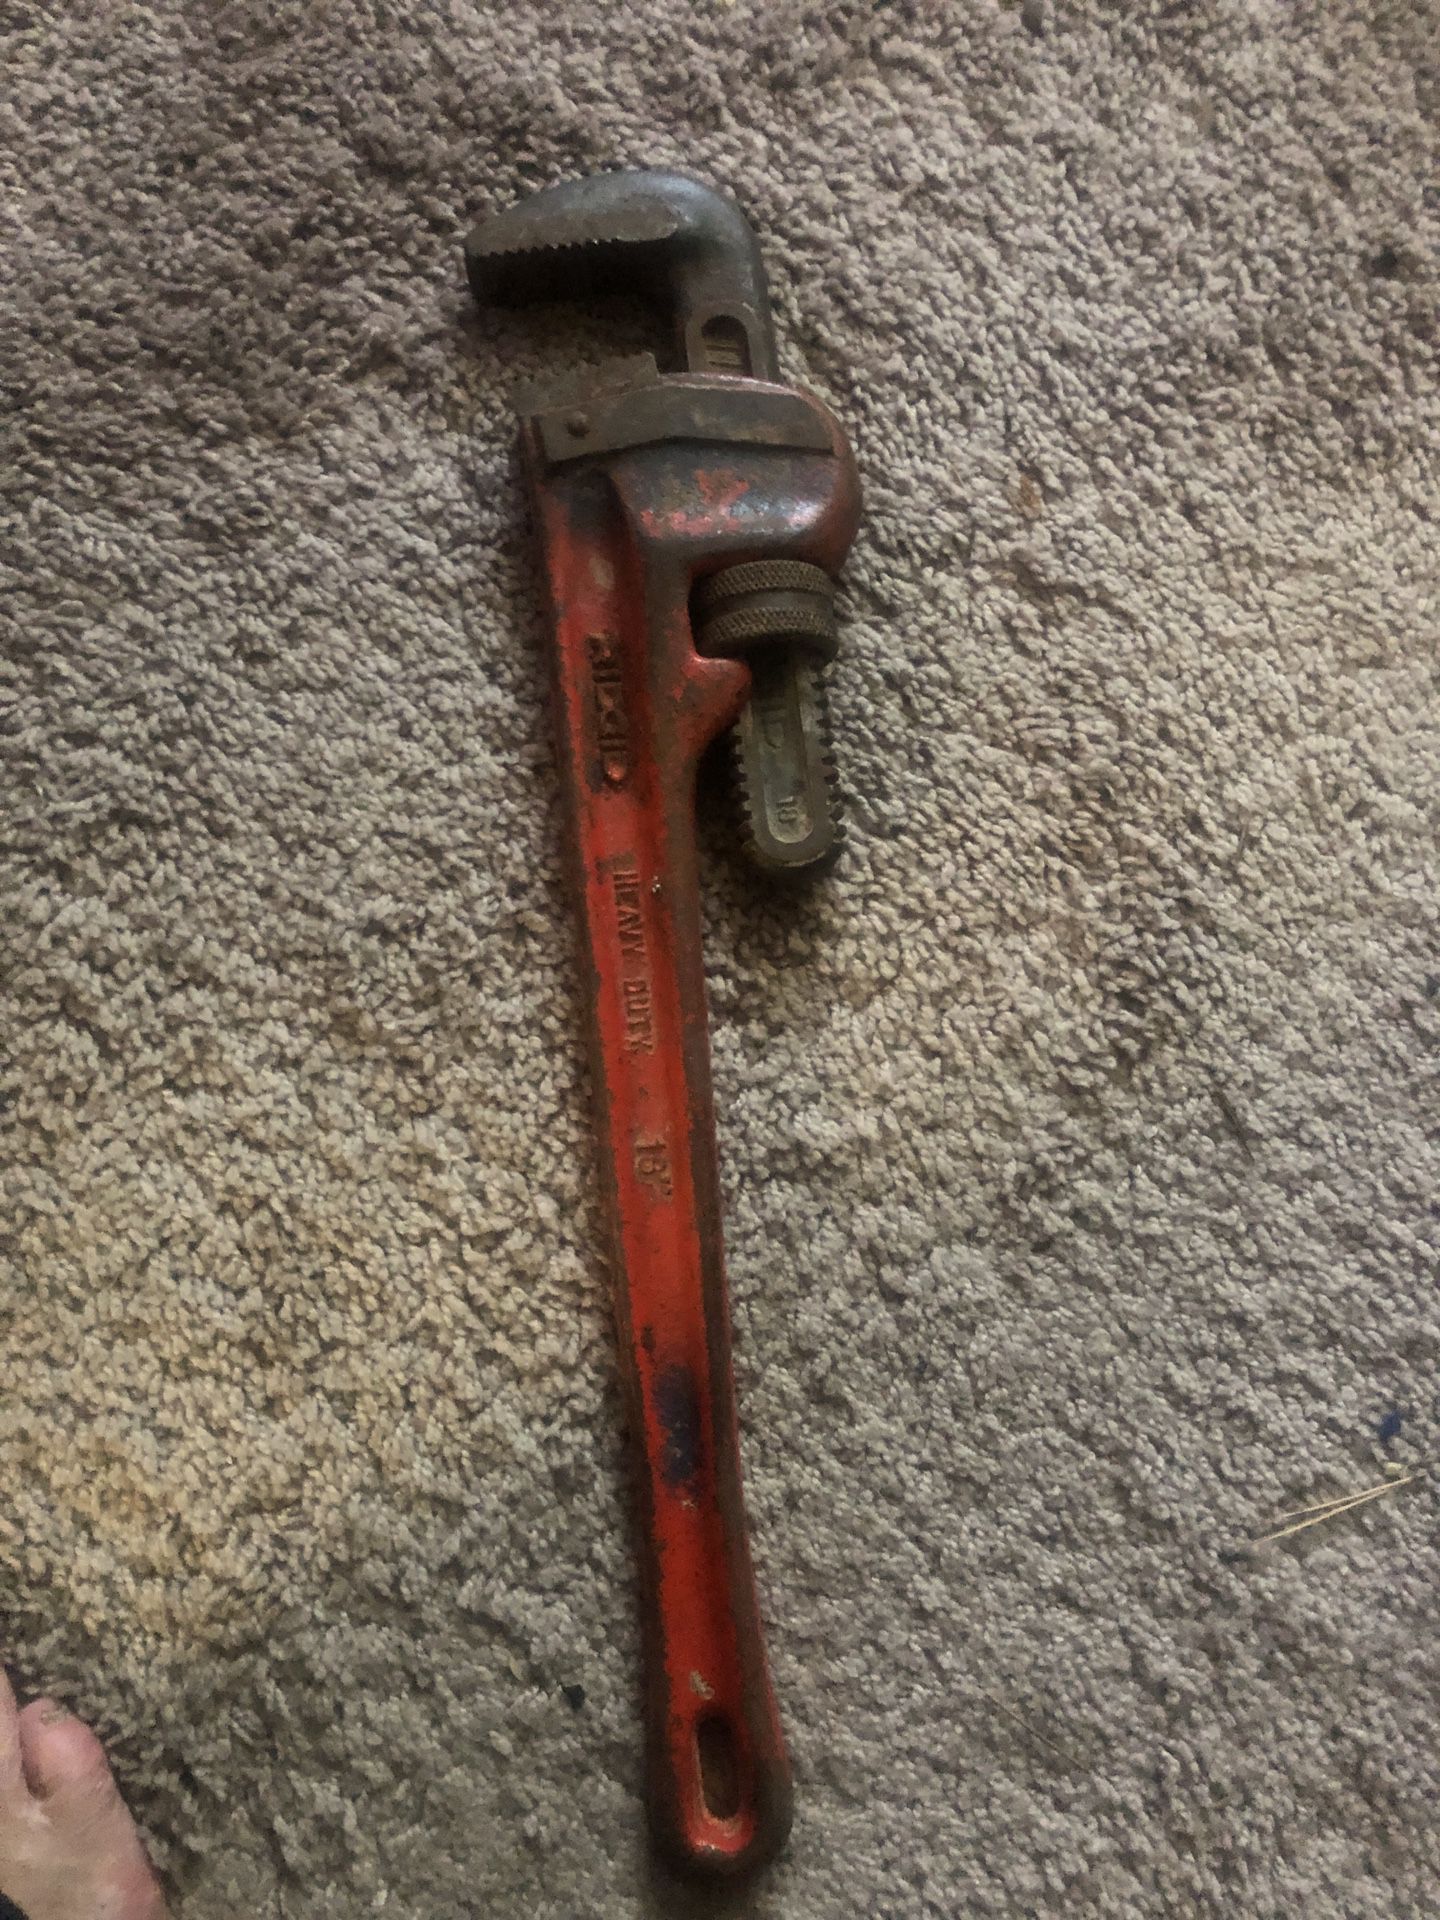 Ridged 18 Inch Pipe Wrench